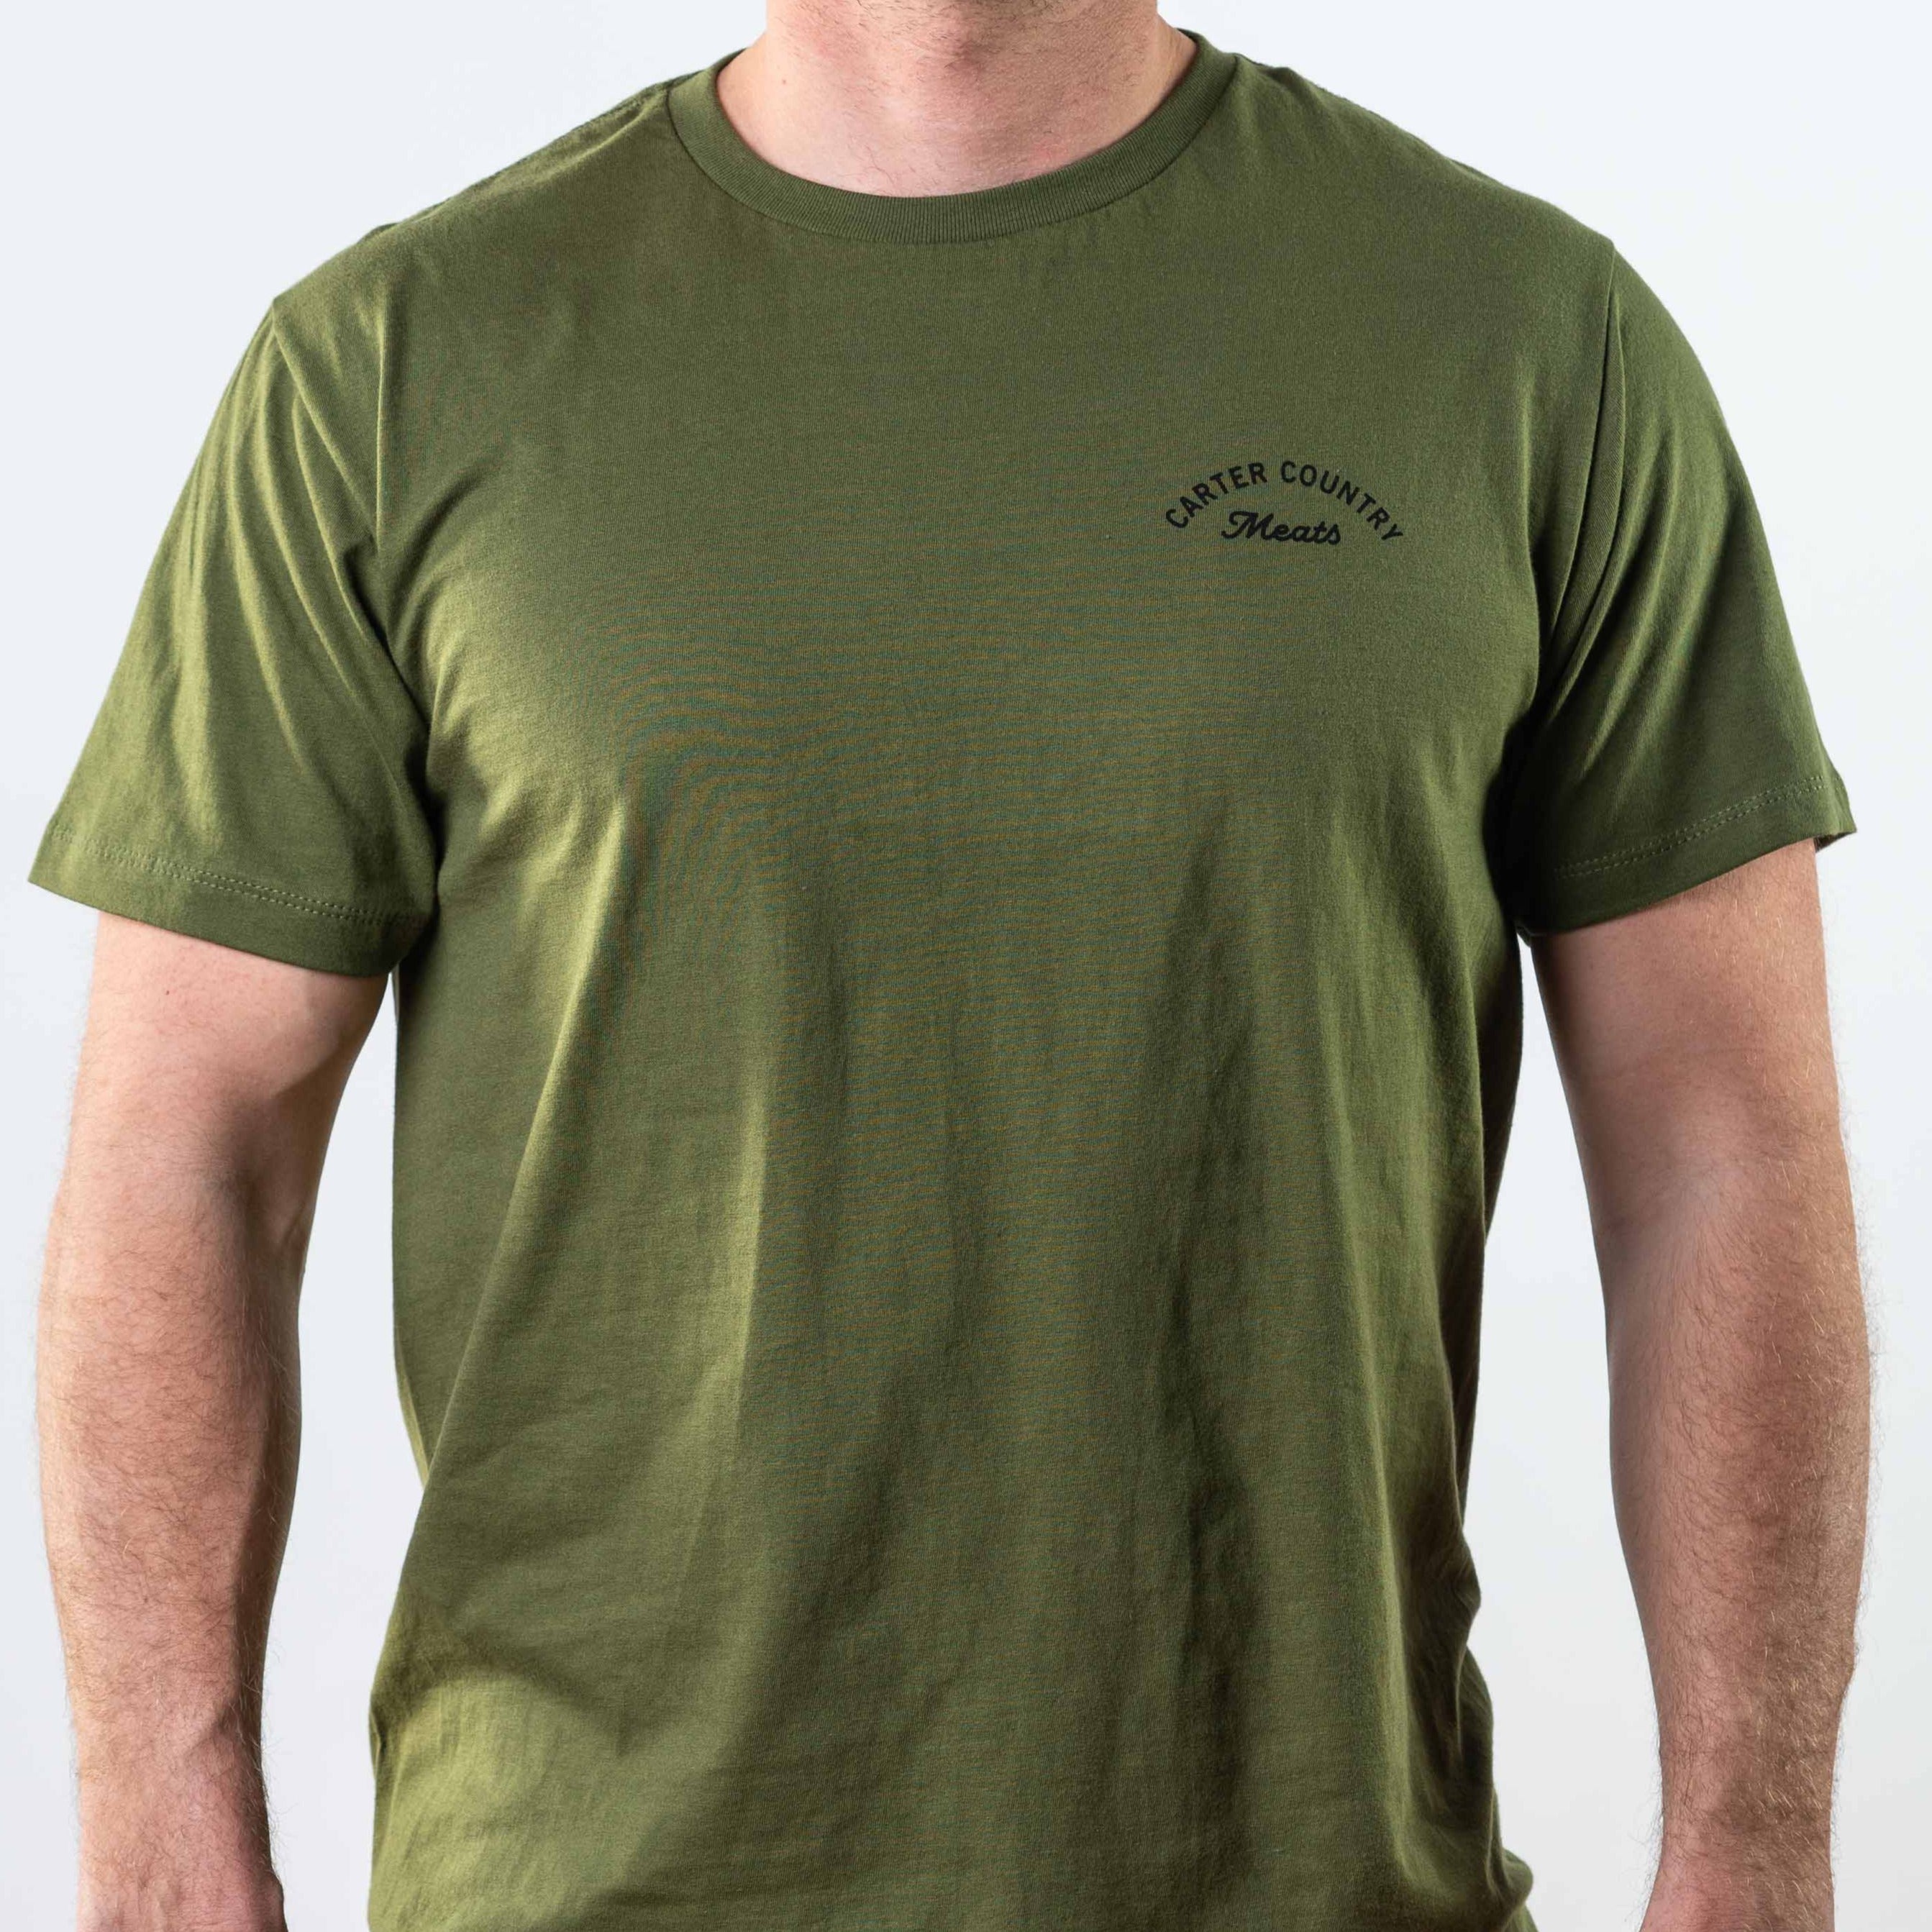 Front modeled view of olive colored tee with Carter country meats text on left chest area